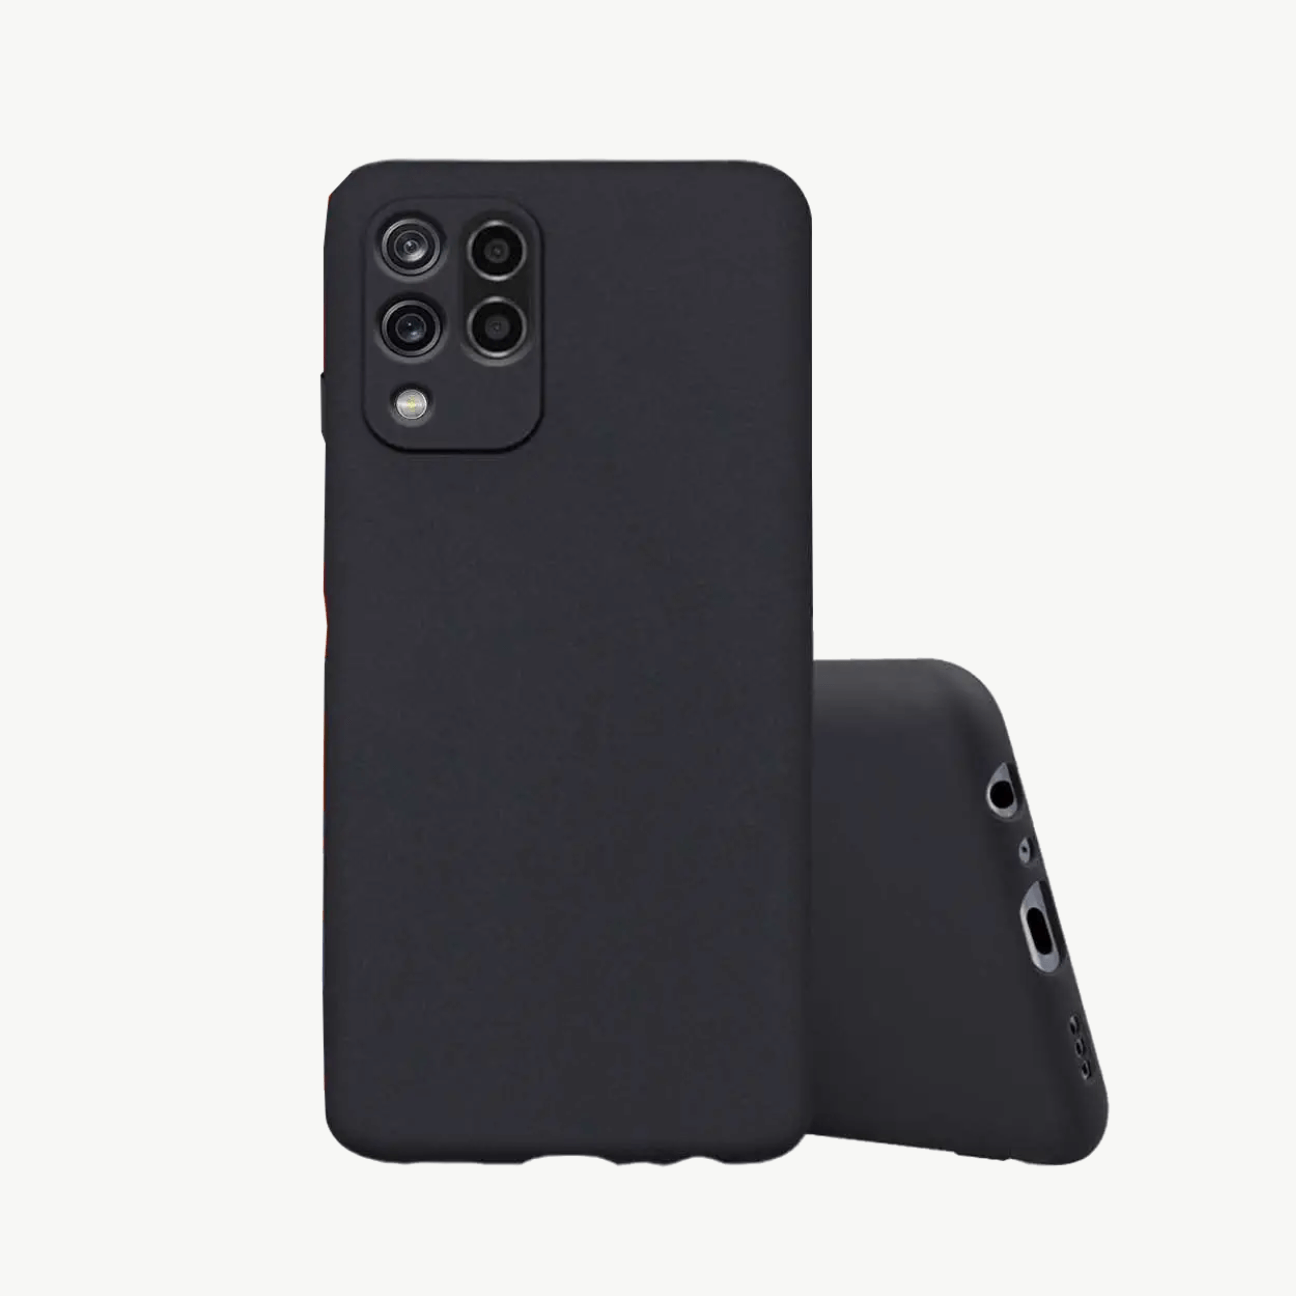 Oppo A7 Black Soft Silicone Phone Case Image